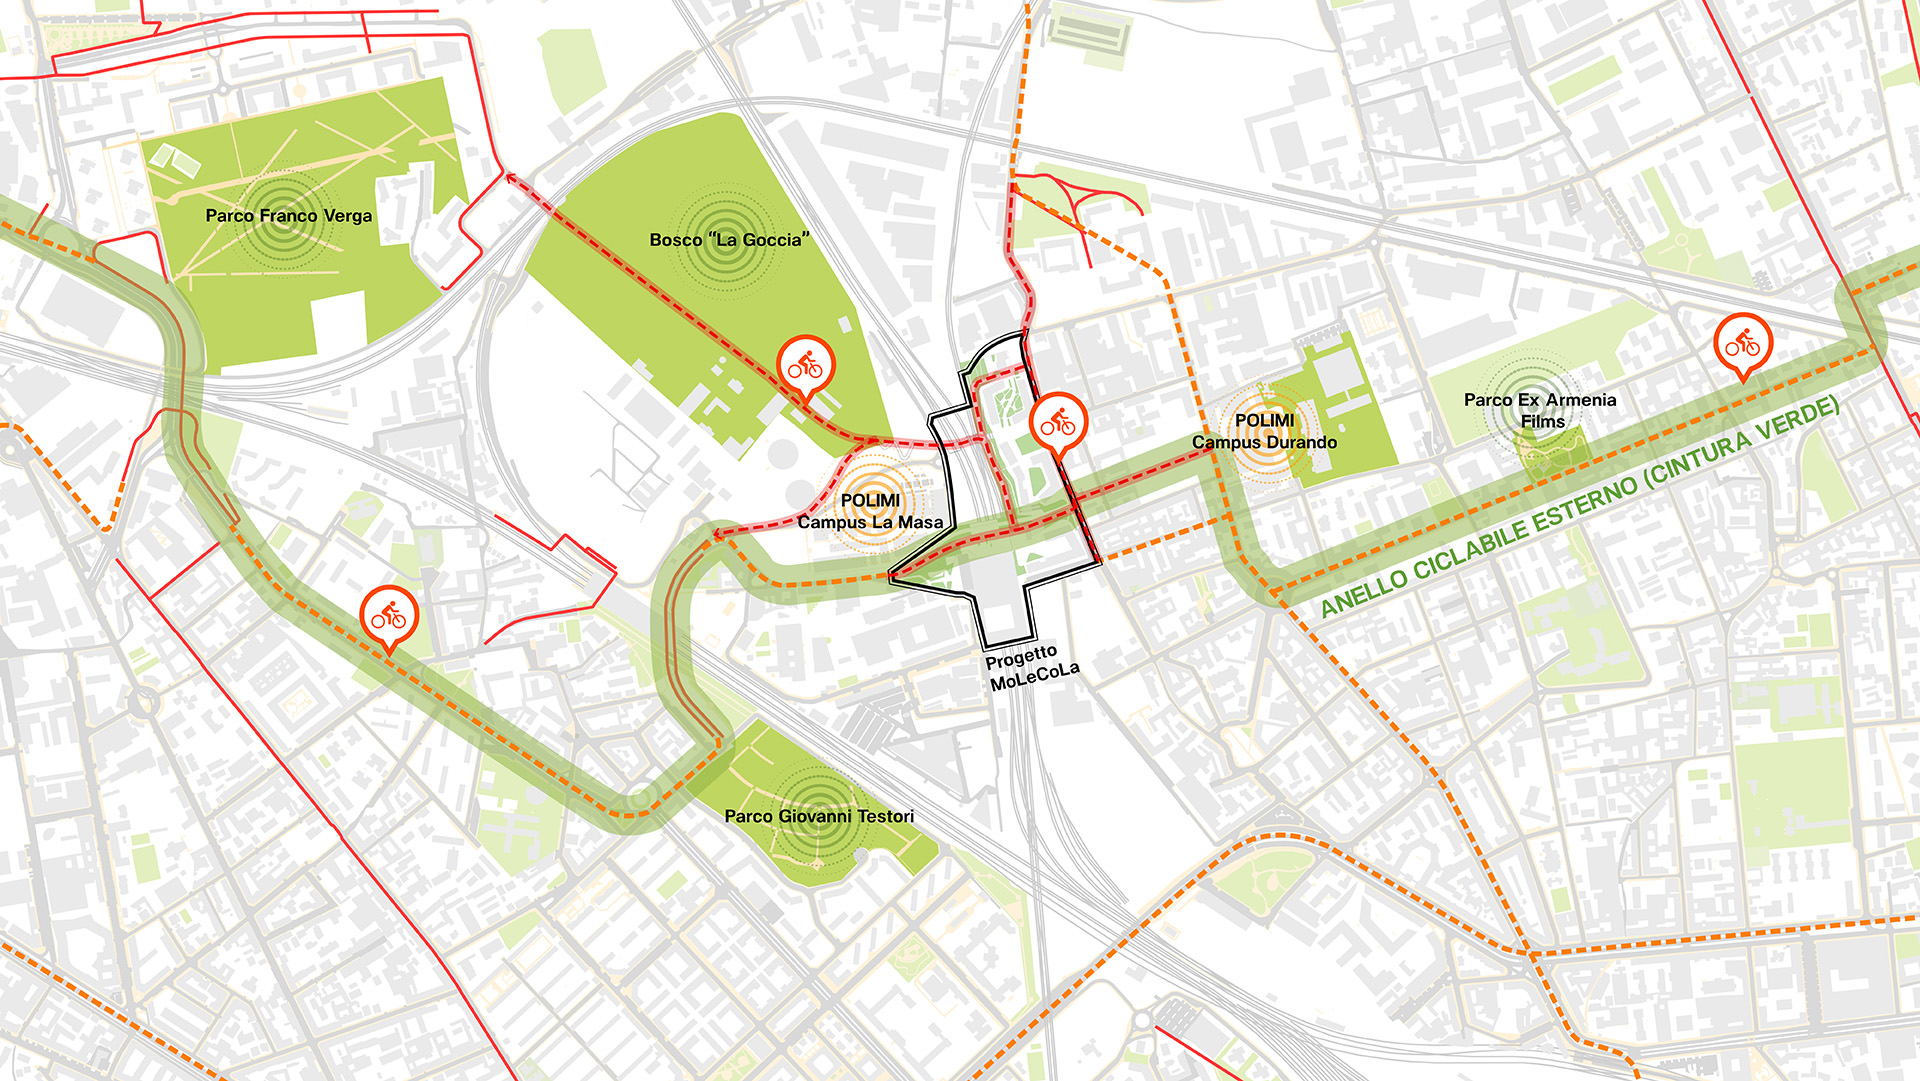 MoLeCoLa area and planned cycling network